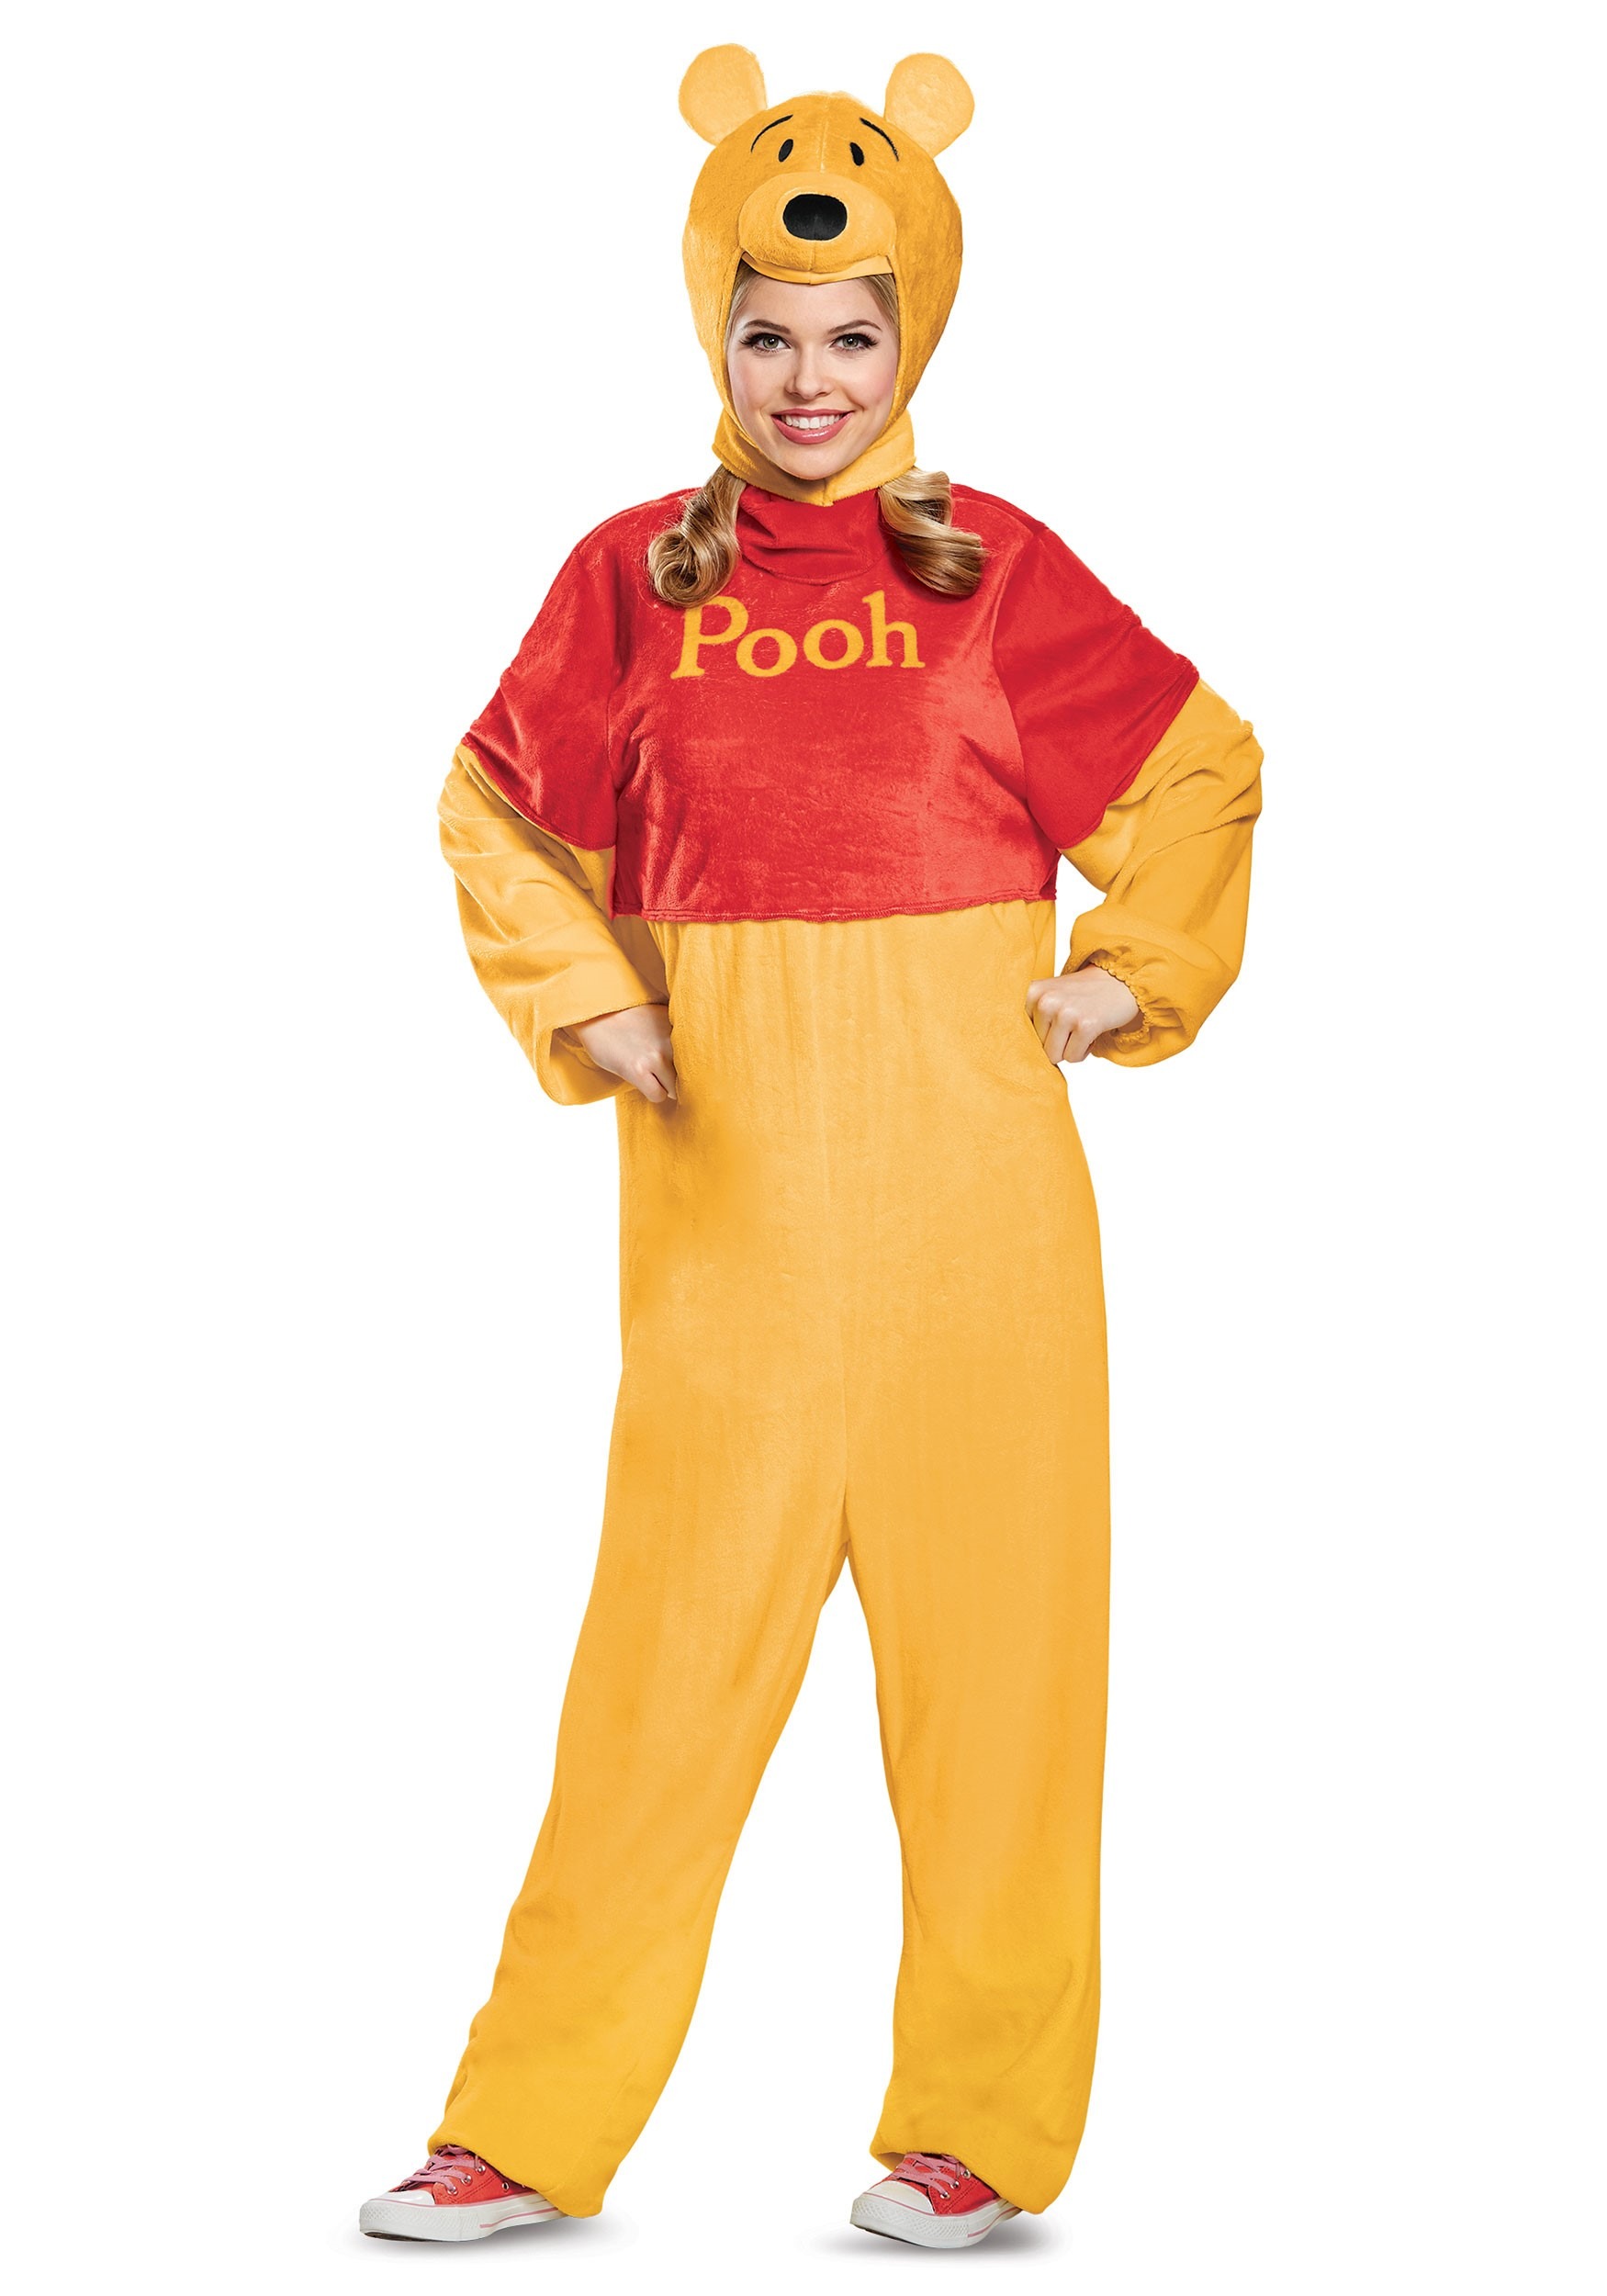 Winnie The Pooh Girl Costume Online S Up To 67 Off Www Realliganaval Com